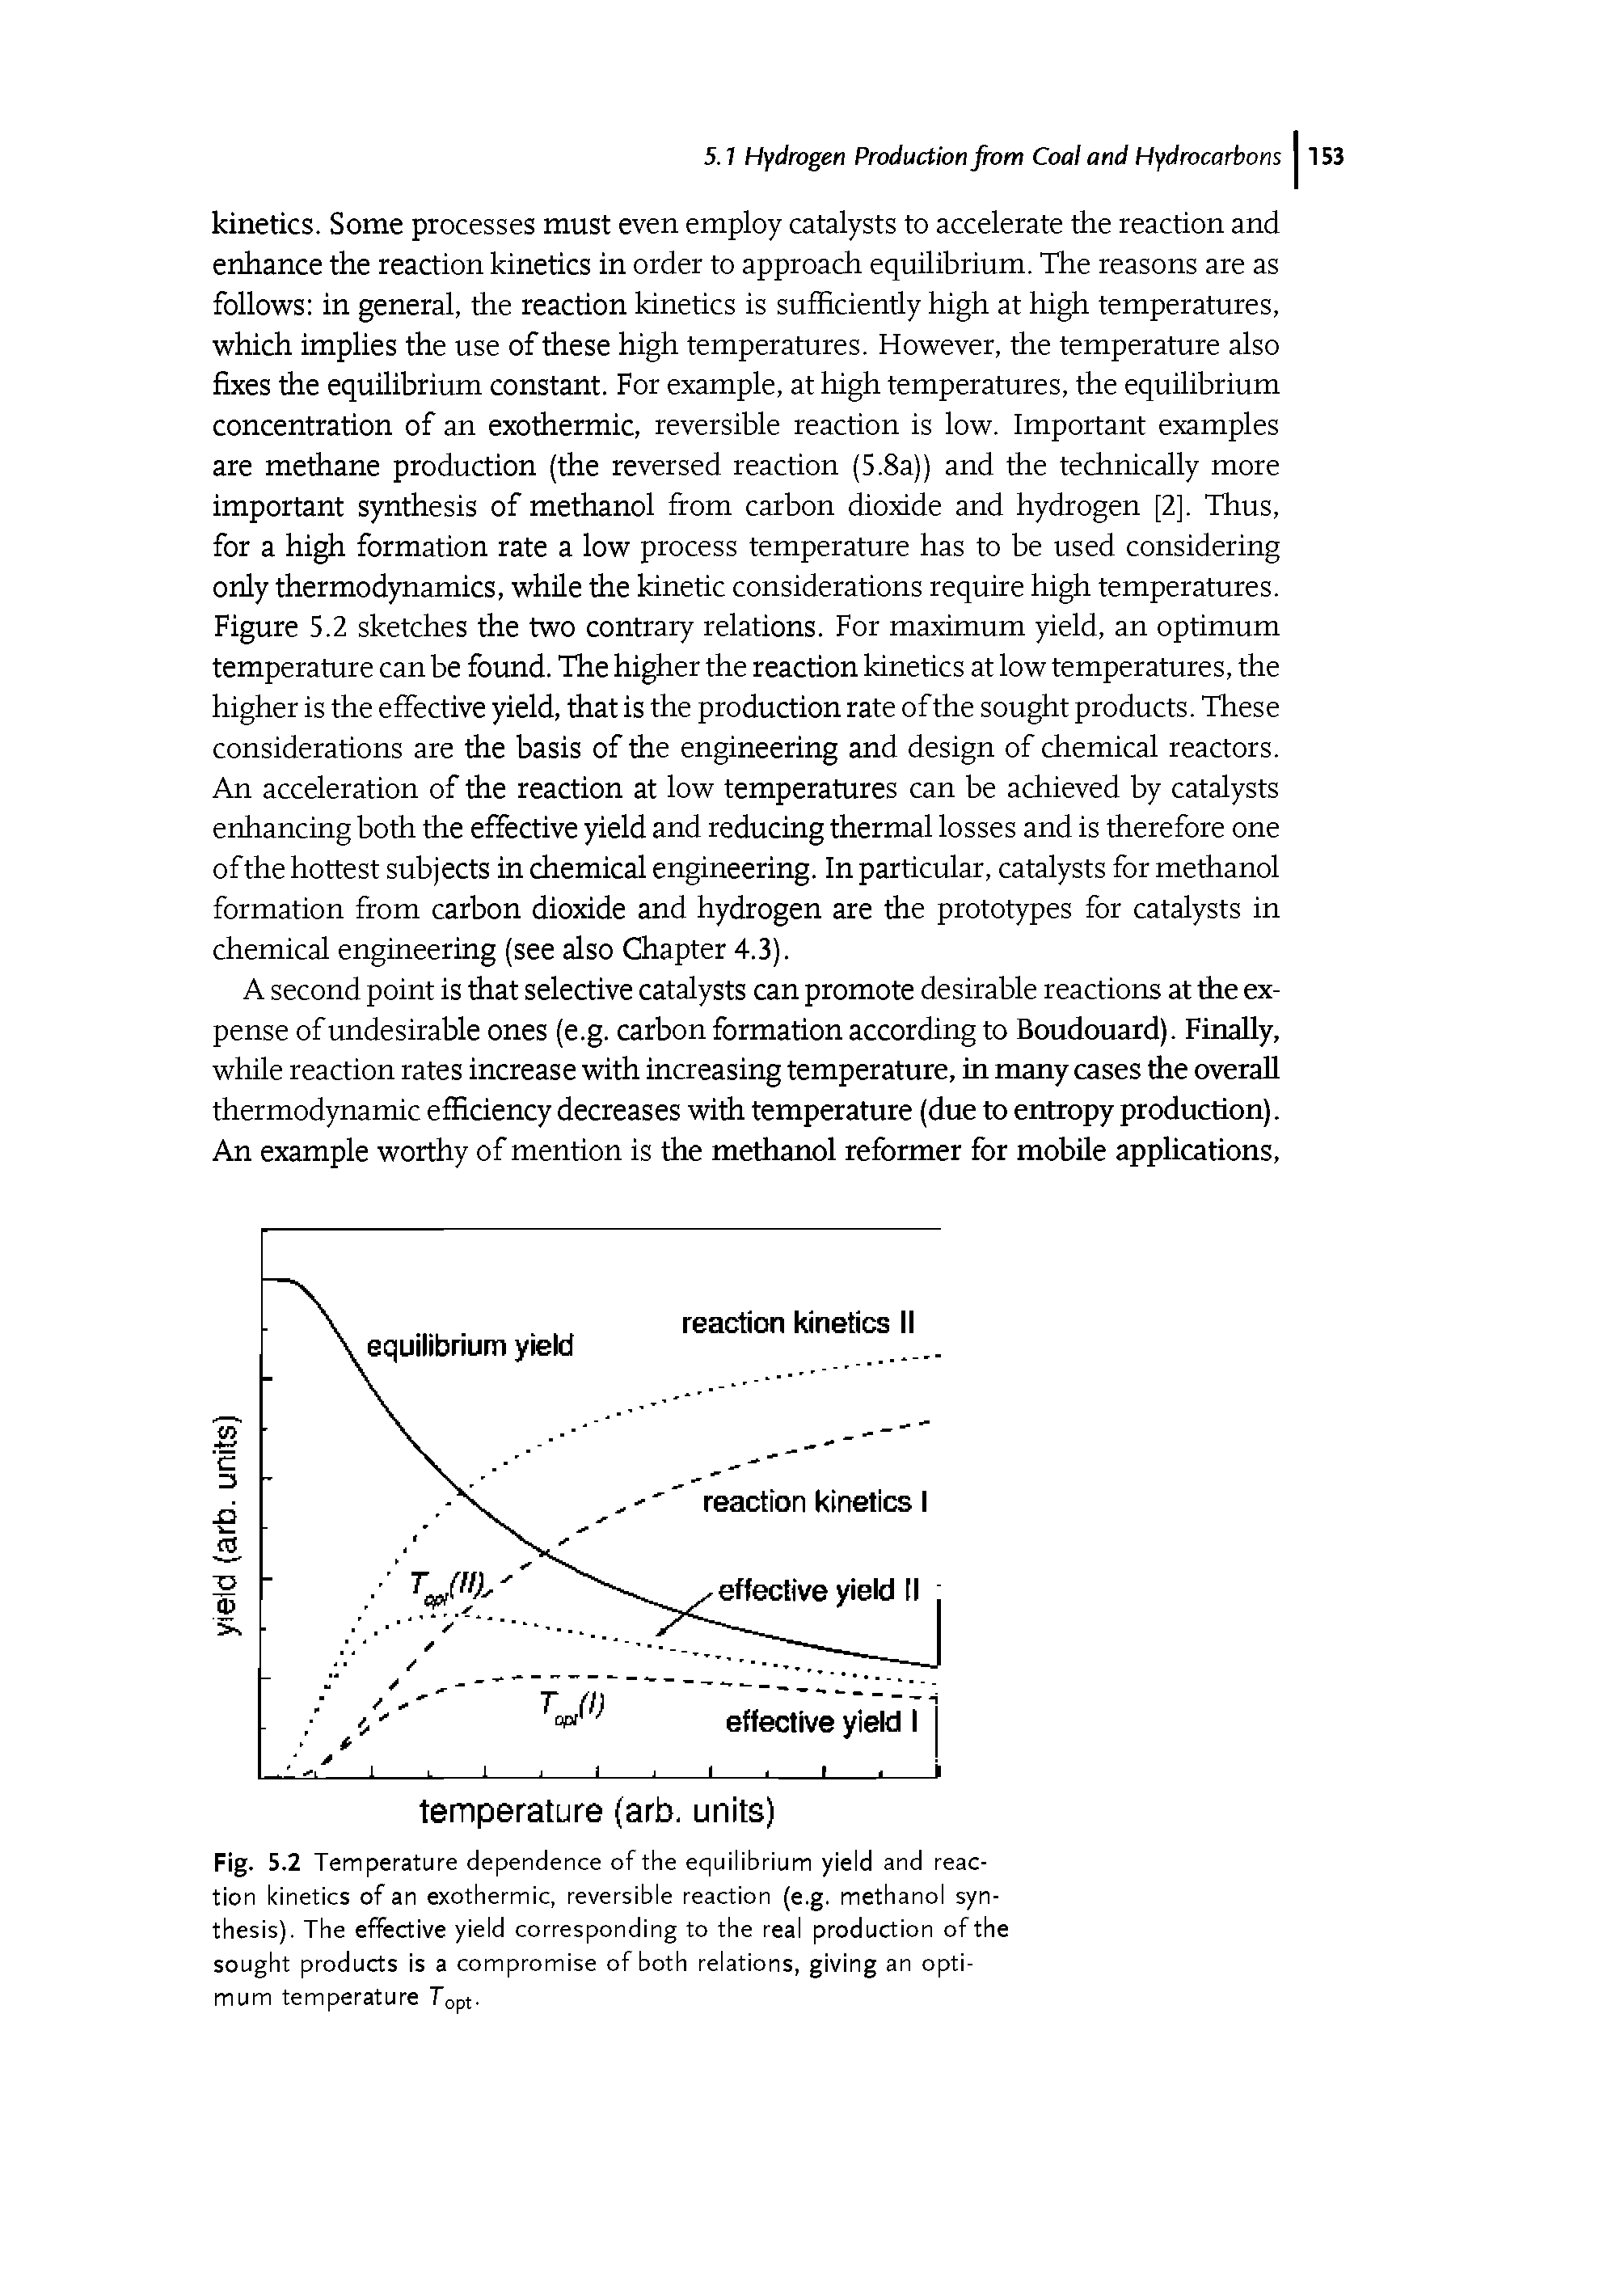 Fig. 5.2 Temperature dependence of the equilibrium yield and reaction kinetics of an exothermic, reversible reaction (e.g. methanol synthesis). The effective yield corresponding to the real production of the sought products is a compromise of both relations, giving an optimum temperature Topt.